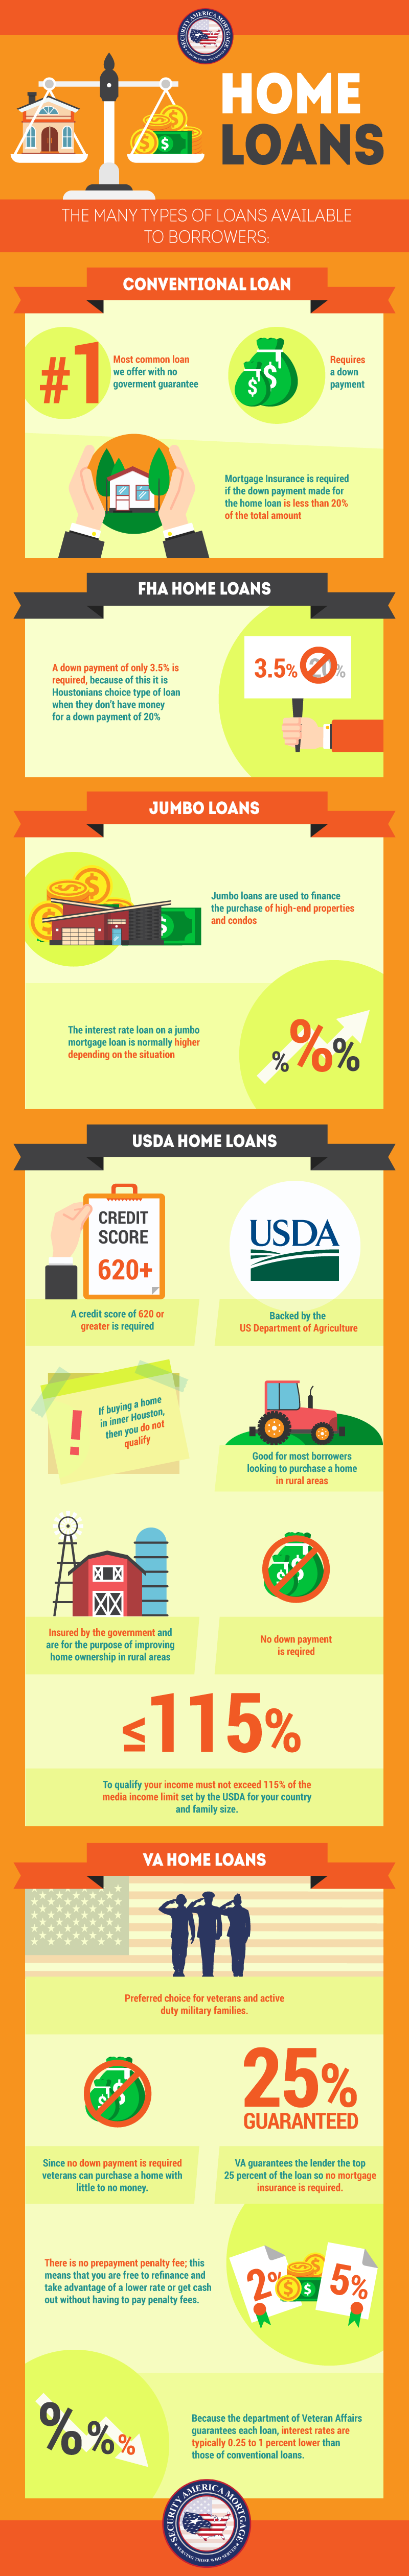 infographic of mortgage types